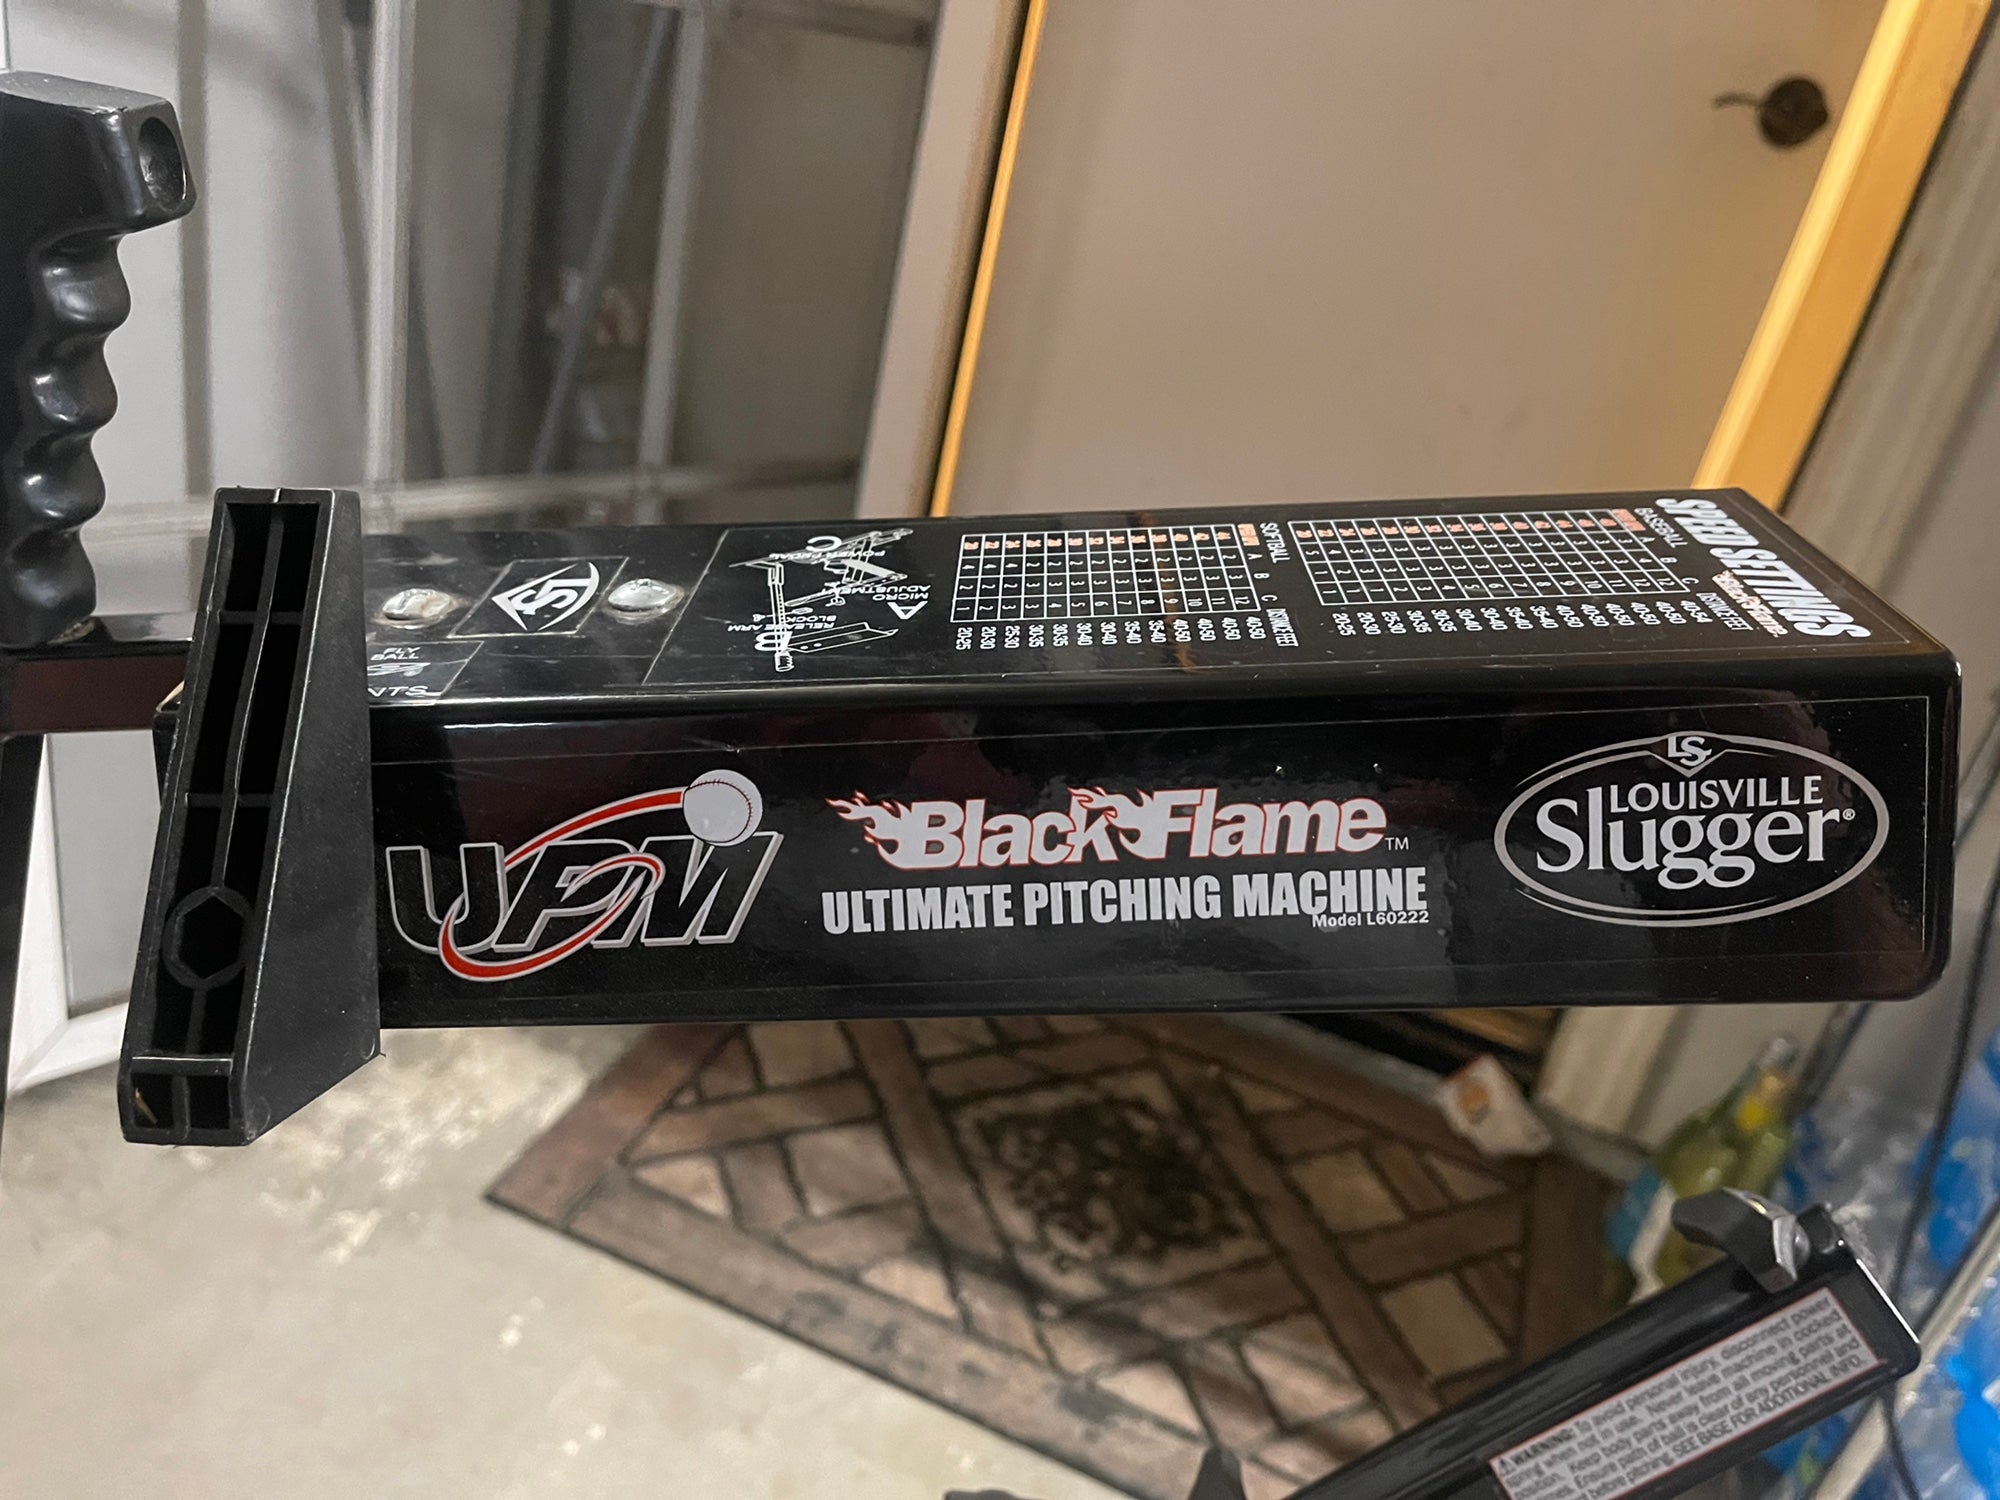 Louisville+Slugger+Black+Flame+Pitching+Machine+-+L60222 for sale online